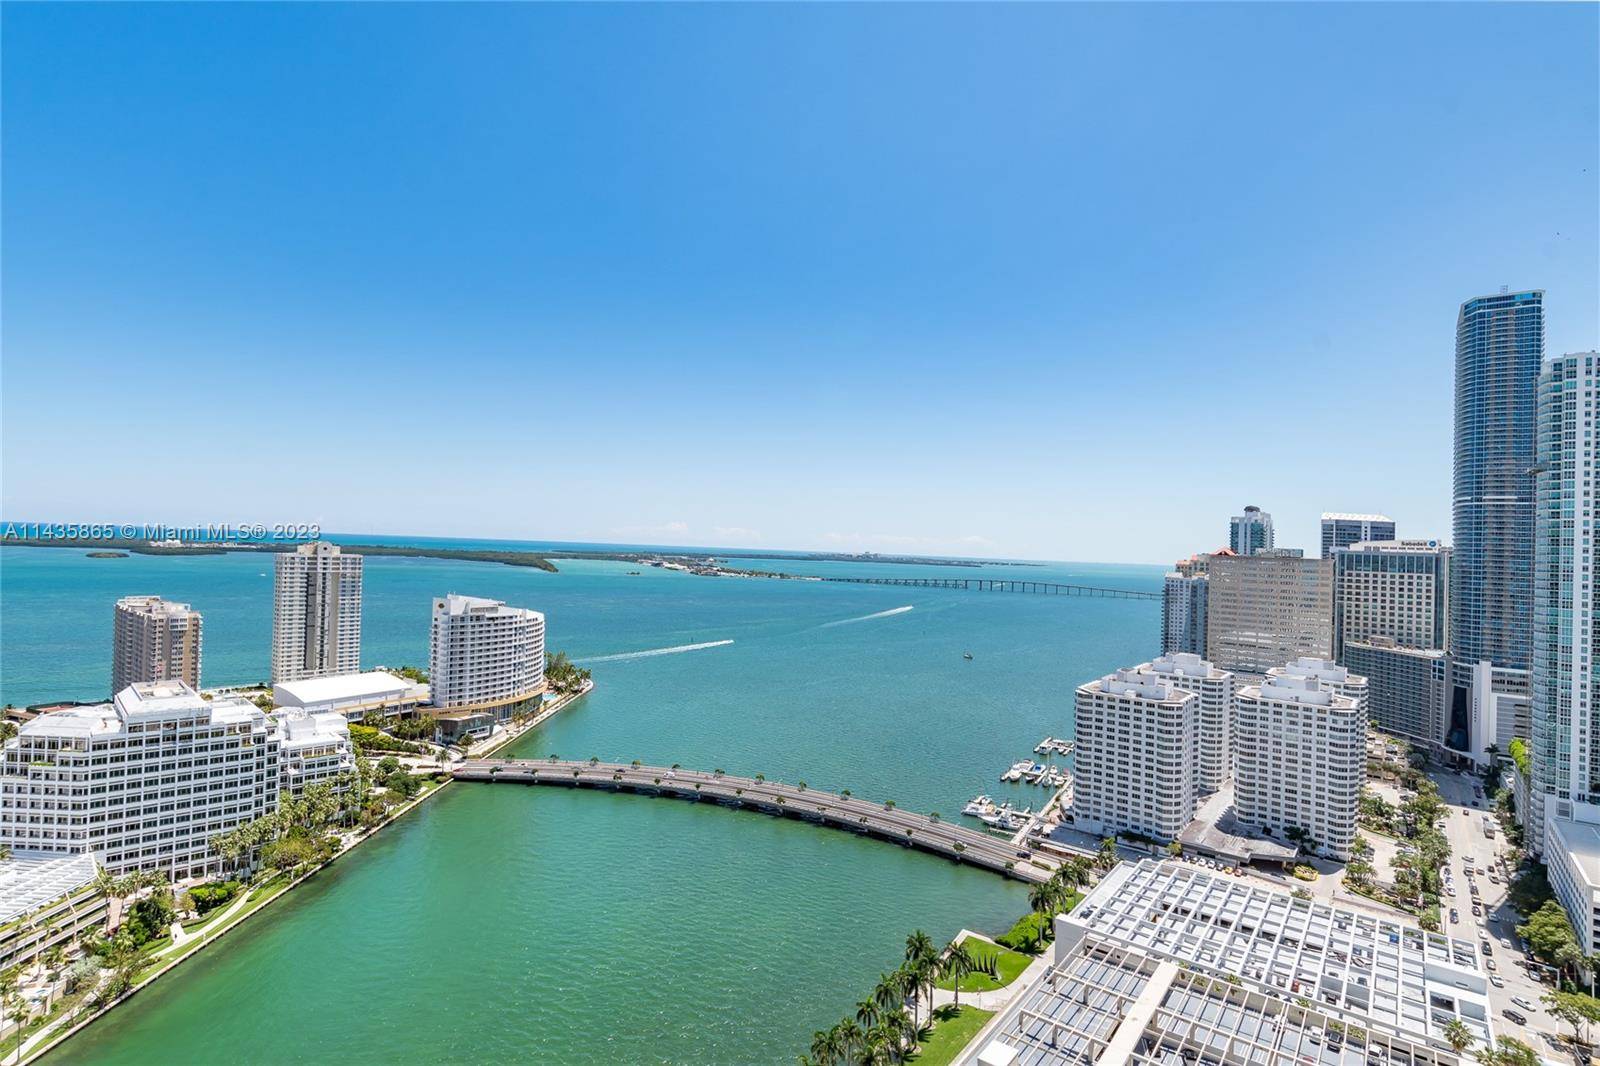 SPECTACULAR VIEWS TO BISCAYNE BAY, OCEAN, AND THE CITY.